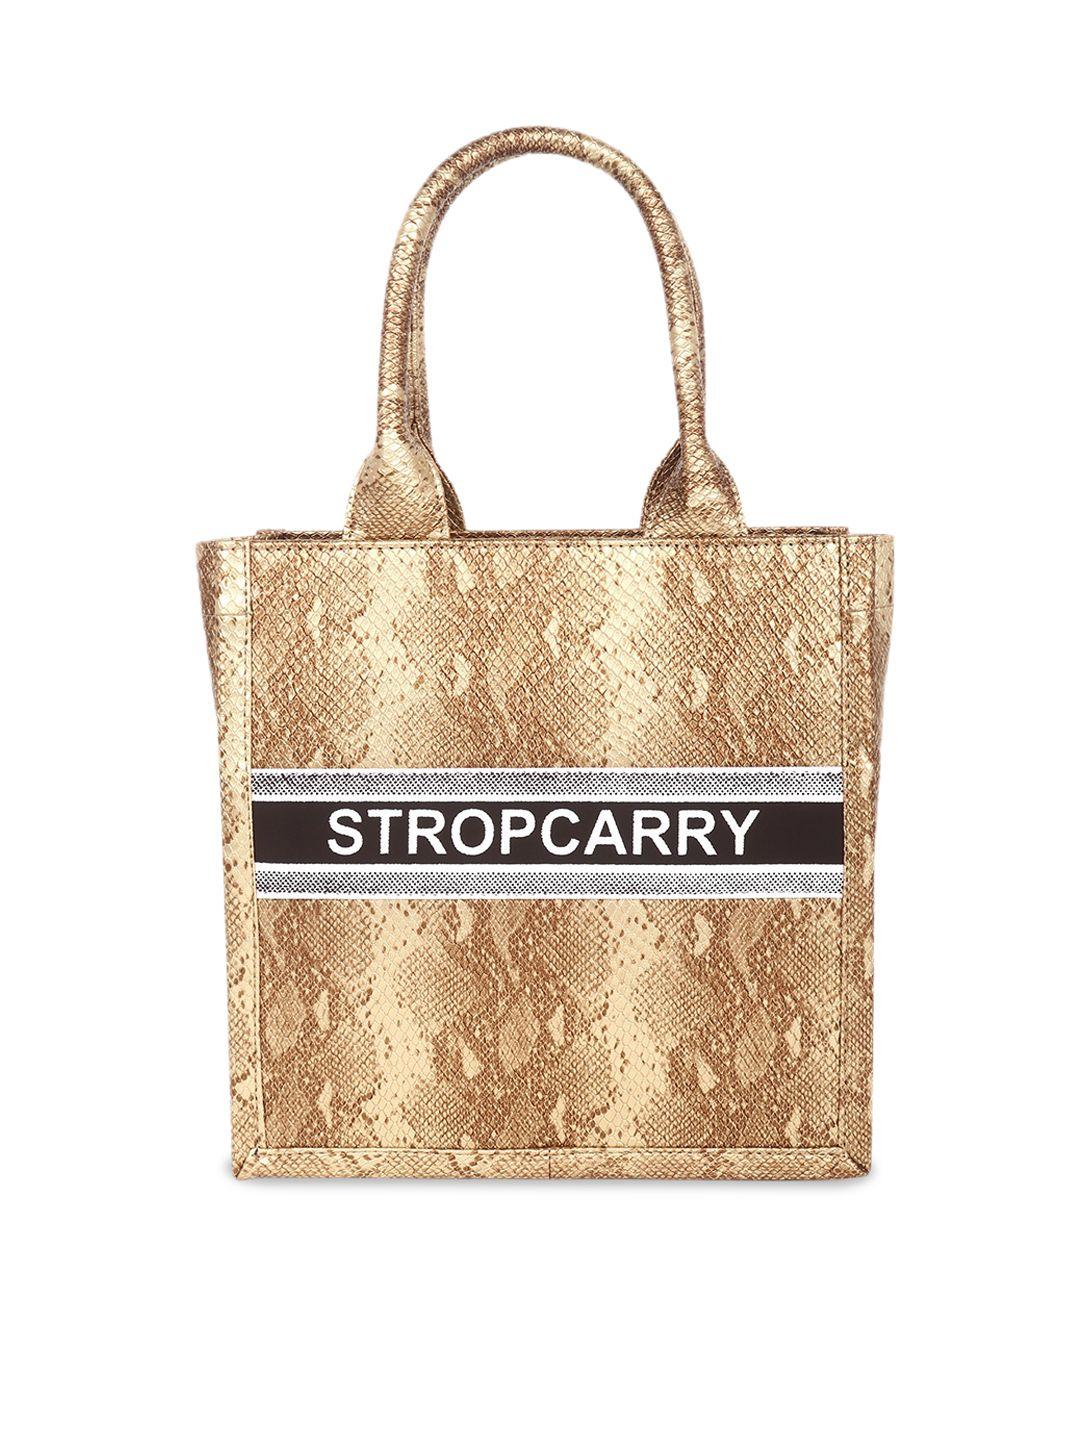 stropcarry gold-toned printed pu structured tote bag